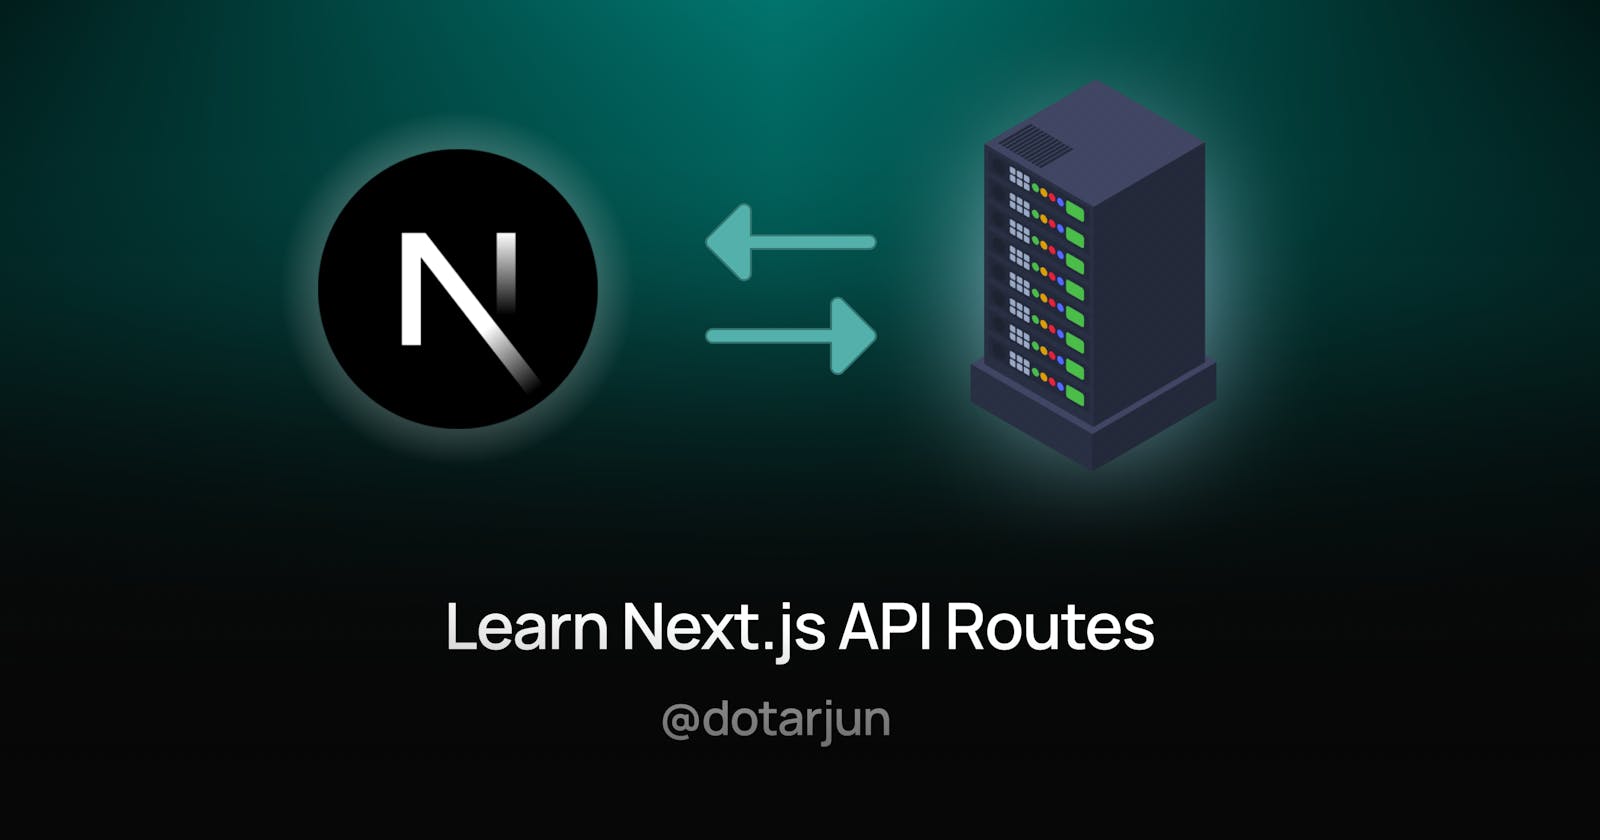 Learn Next.js API Routes - Faster Page Loads and Greater Scalability